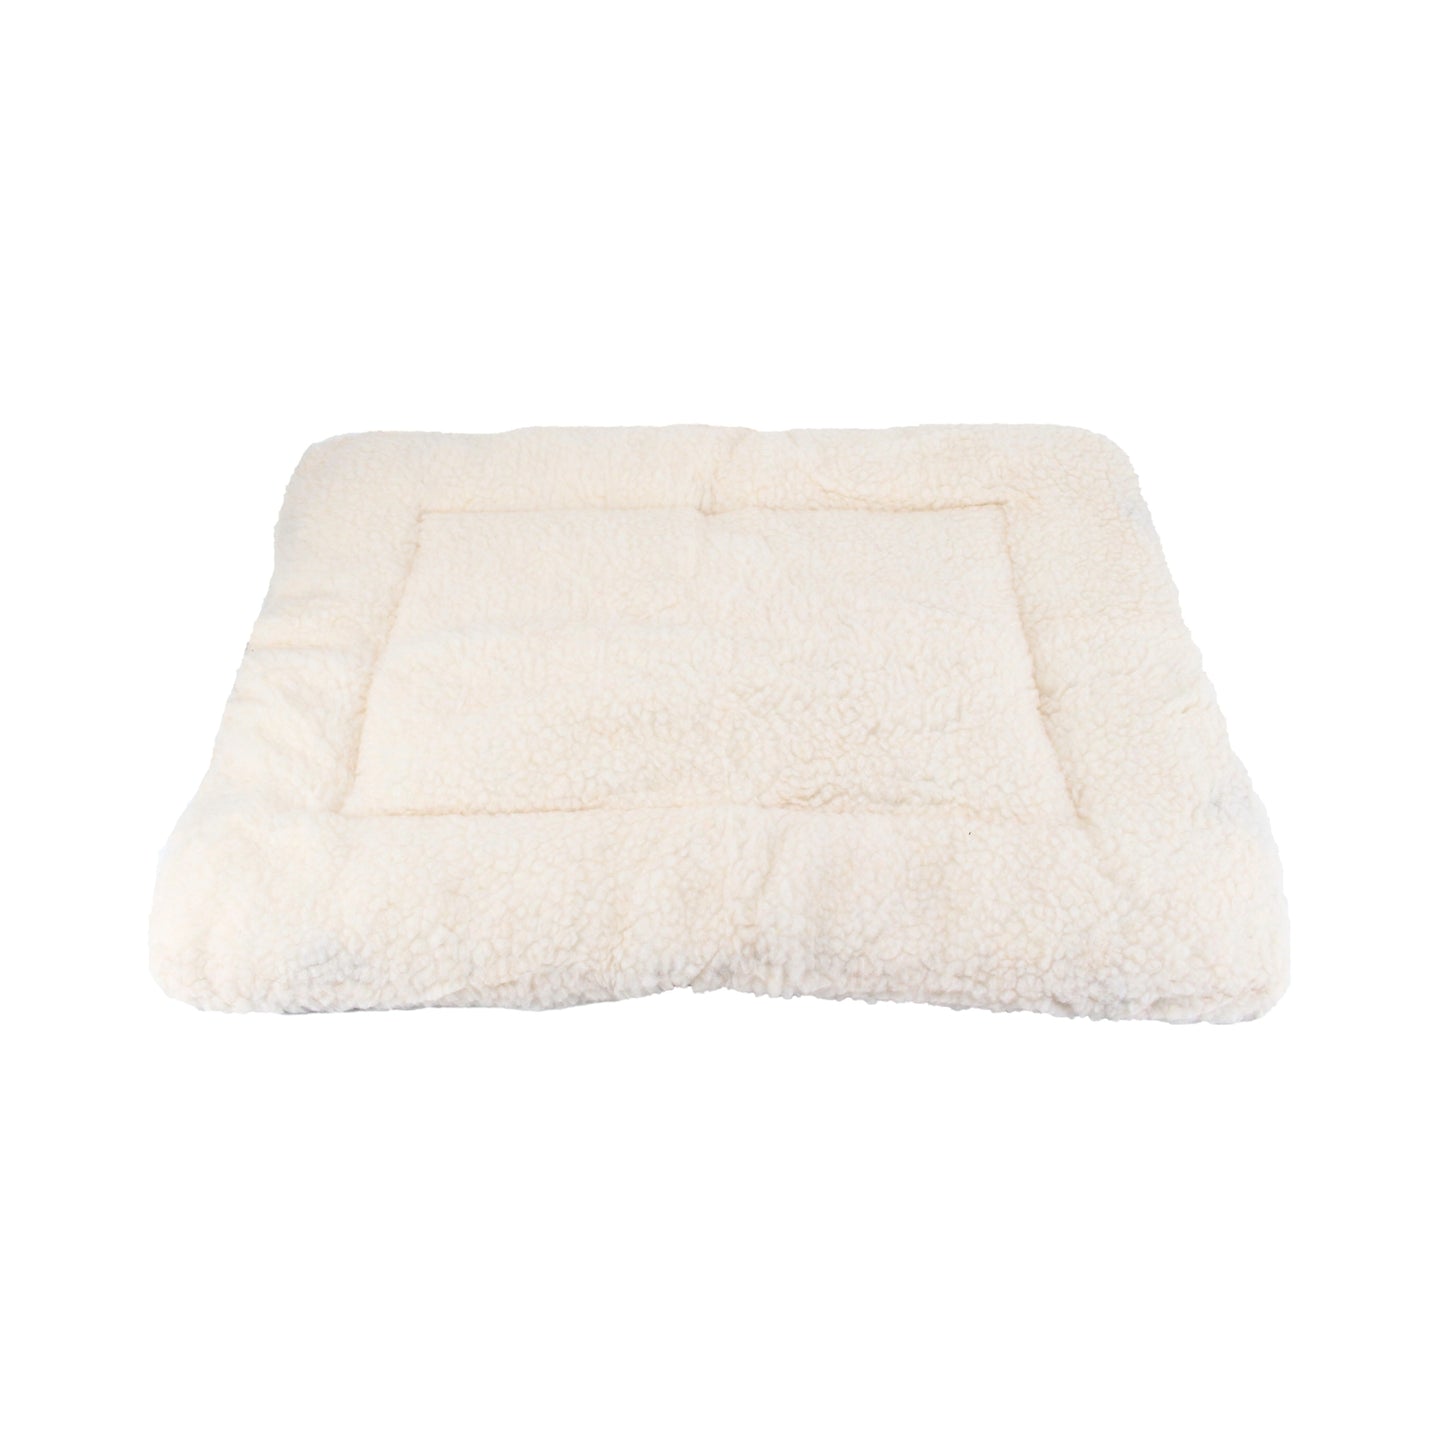 Midlee Fleece Dog Bed Topper for Dog Cot Beds (Cot not Included)…